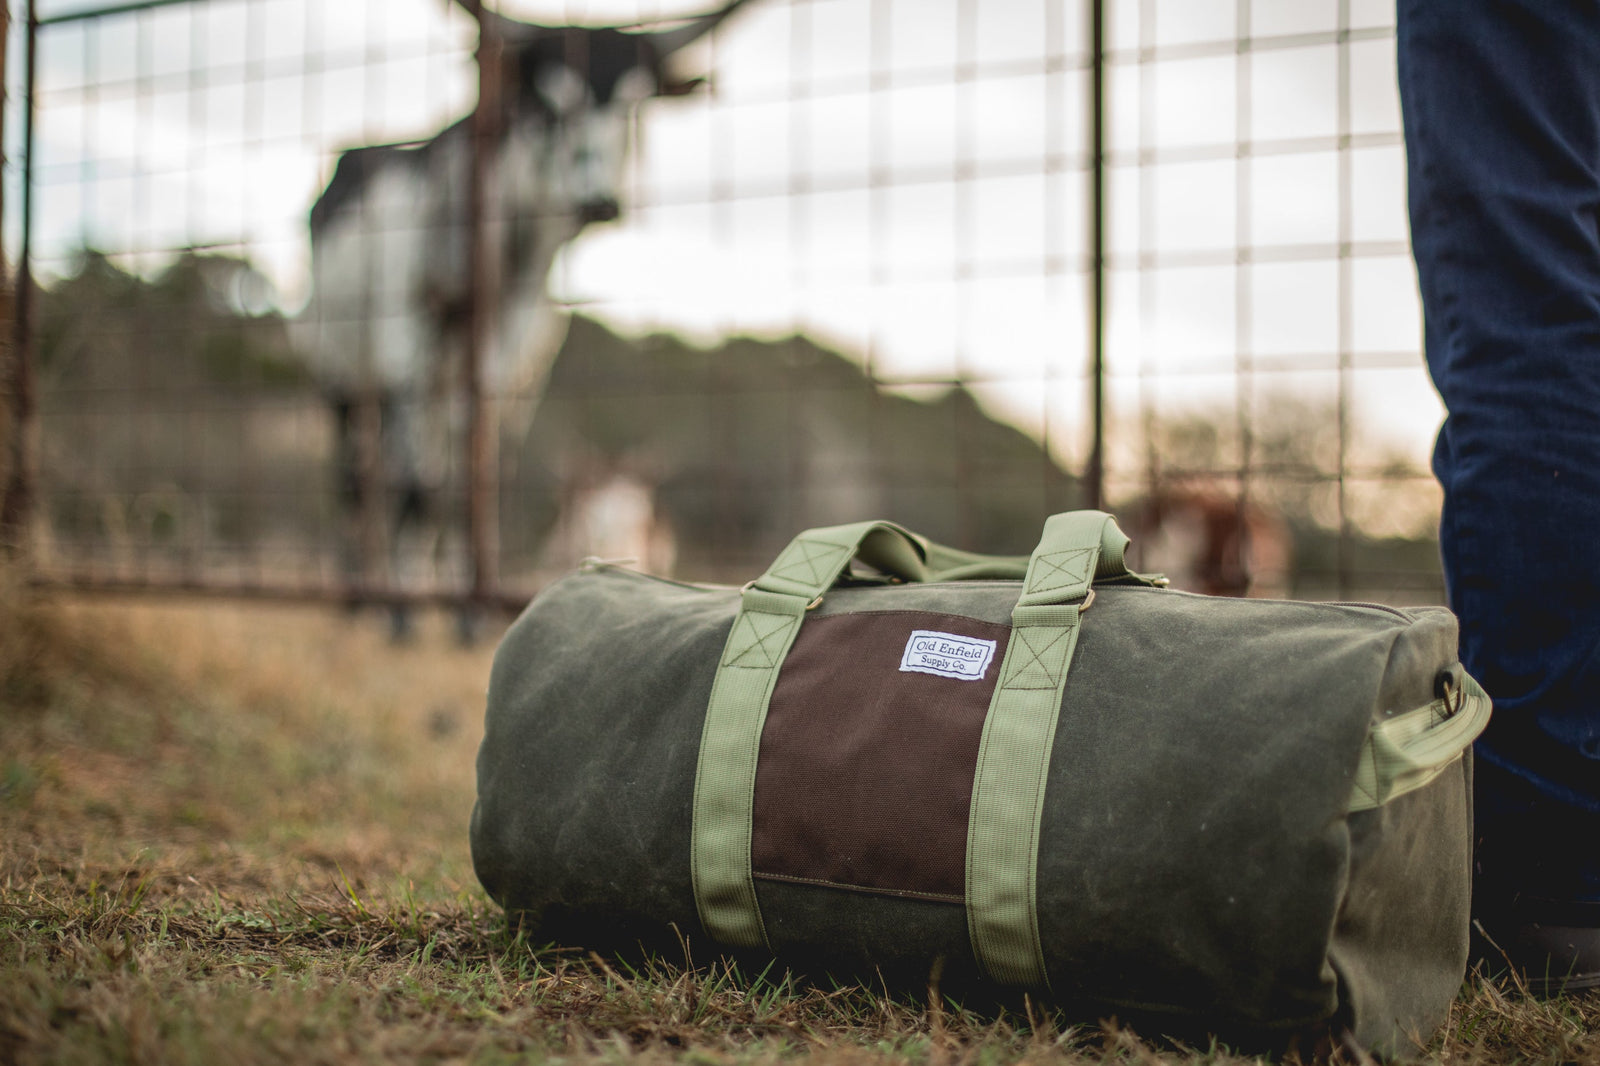 Top 10 Waxed Canvas Duffle Bags for Travel | Woosir